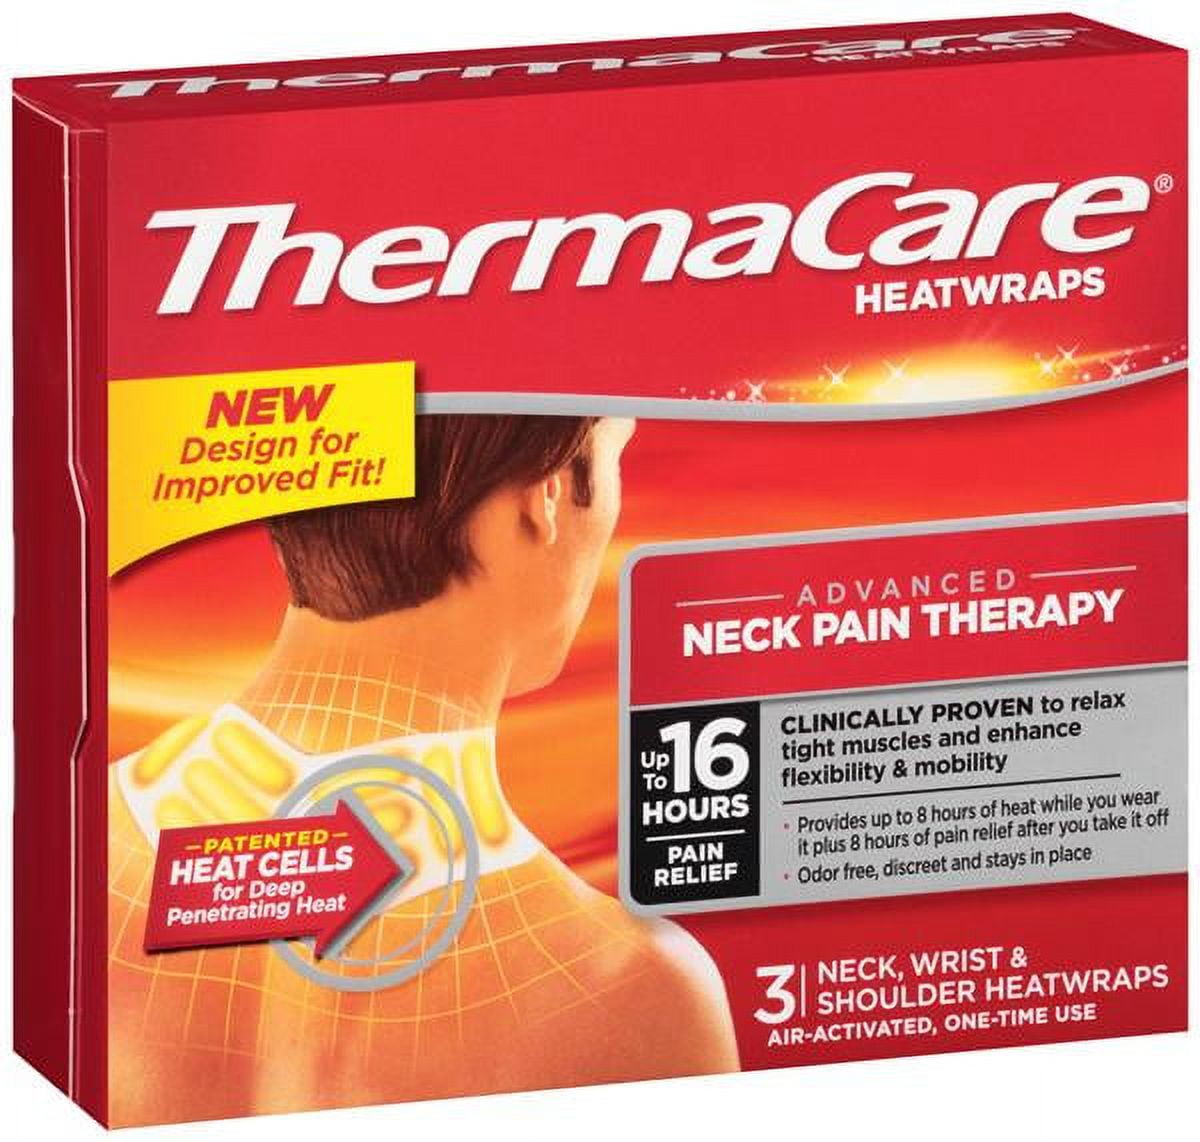 3 Heat Wraps Air-Activated Body Pain Relief Neck Shoulder Heat Therapy One  Size, 1 - Foods Co.